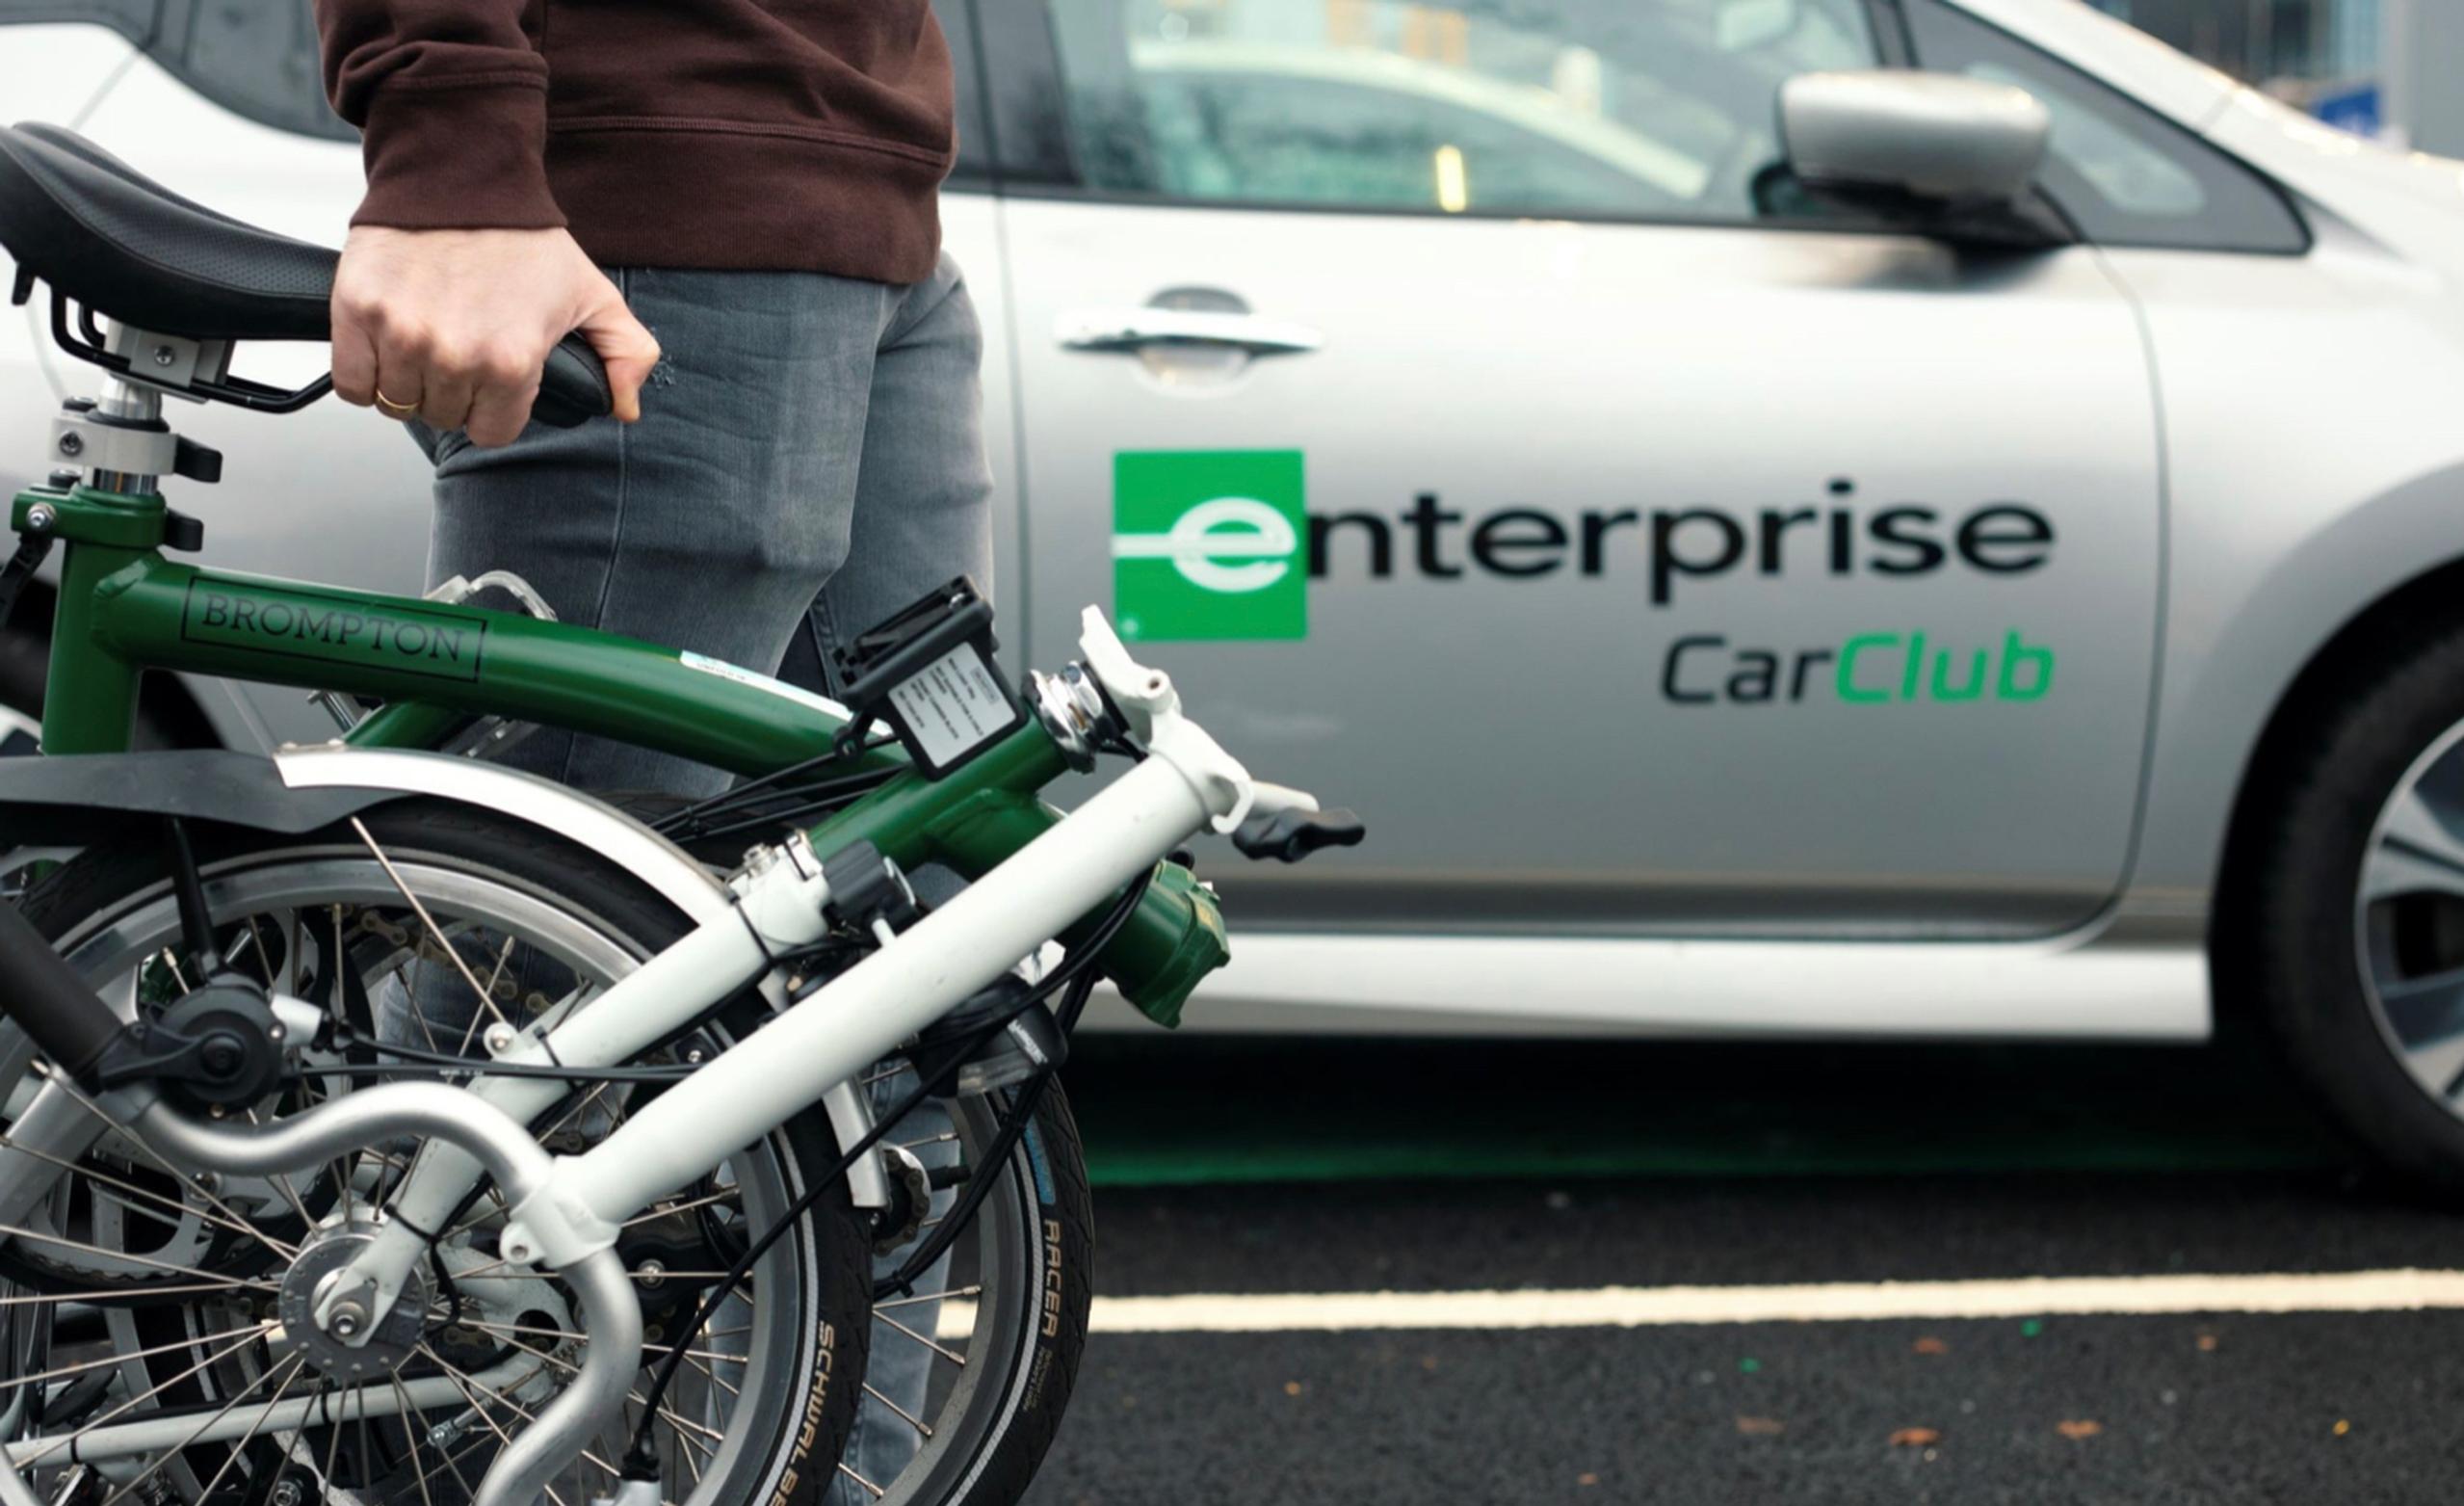 The trial involved Enterprise Car Club and Brompton Bike Hire